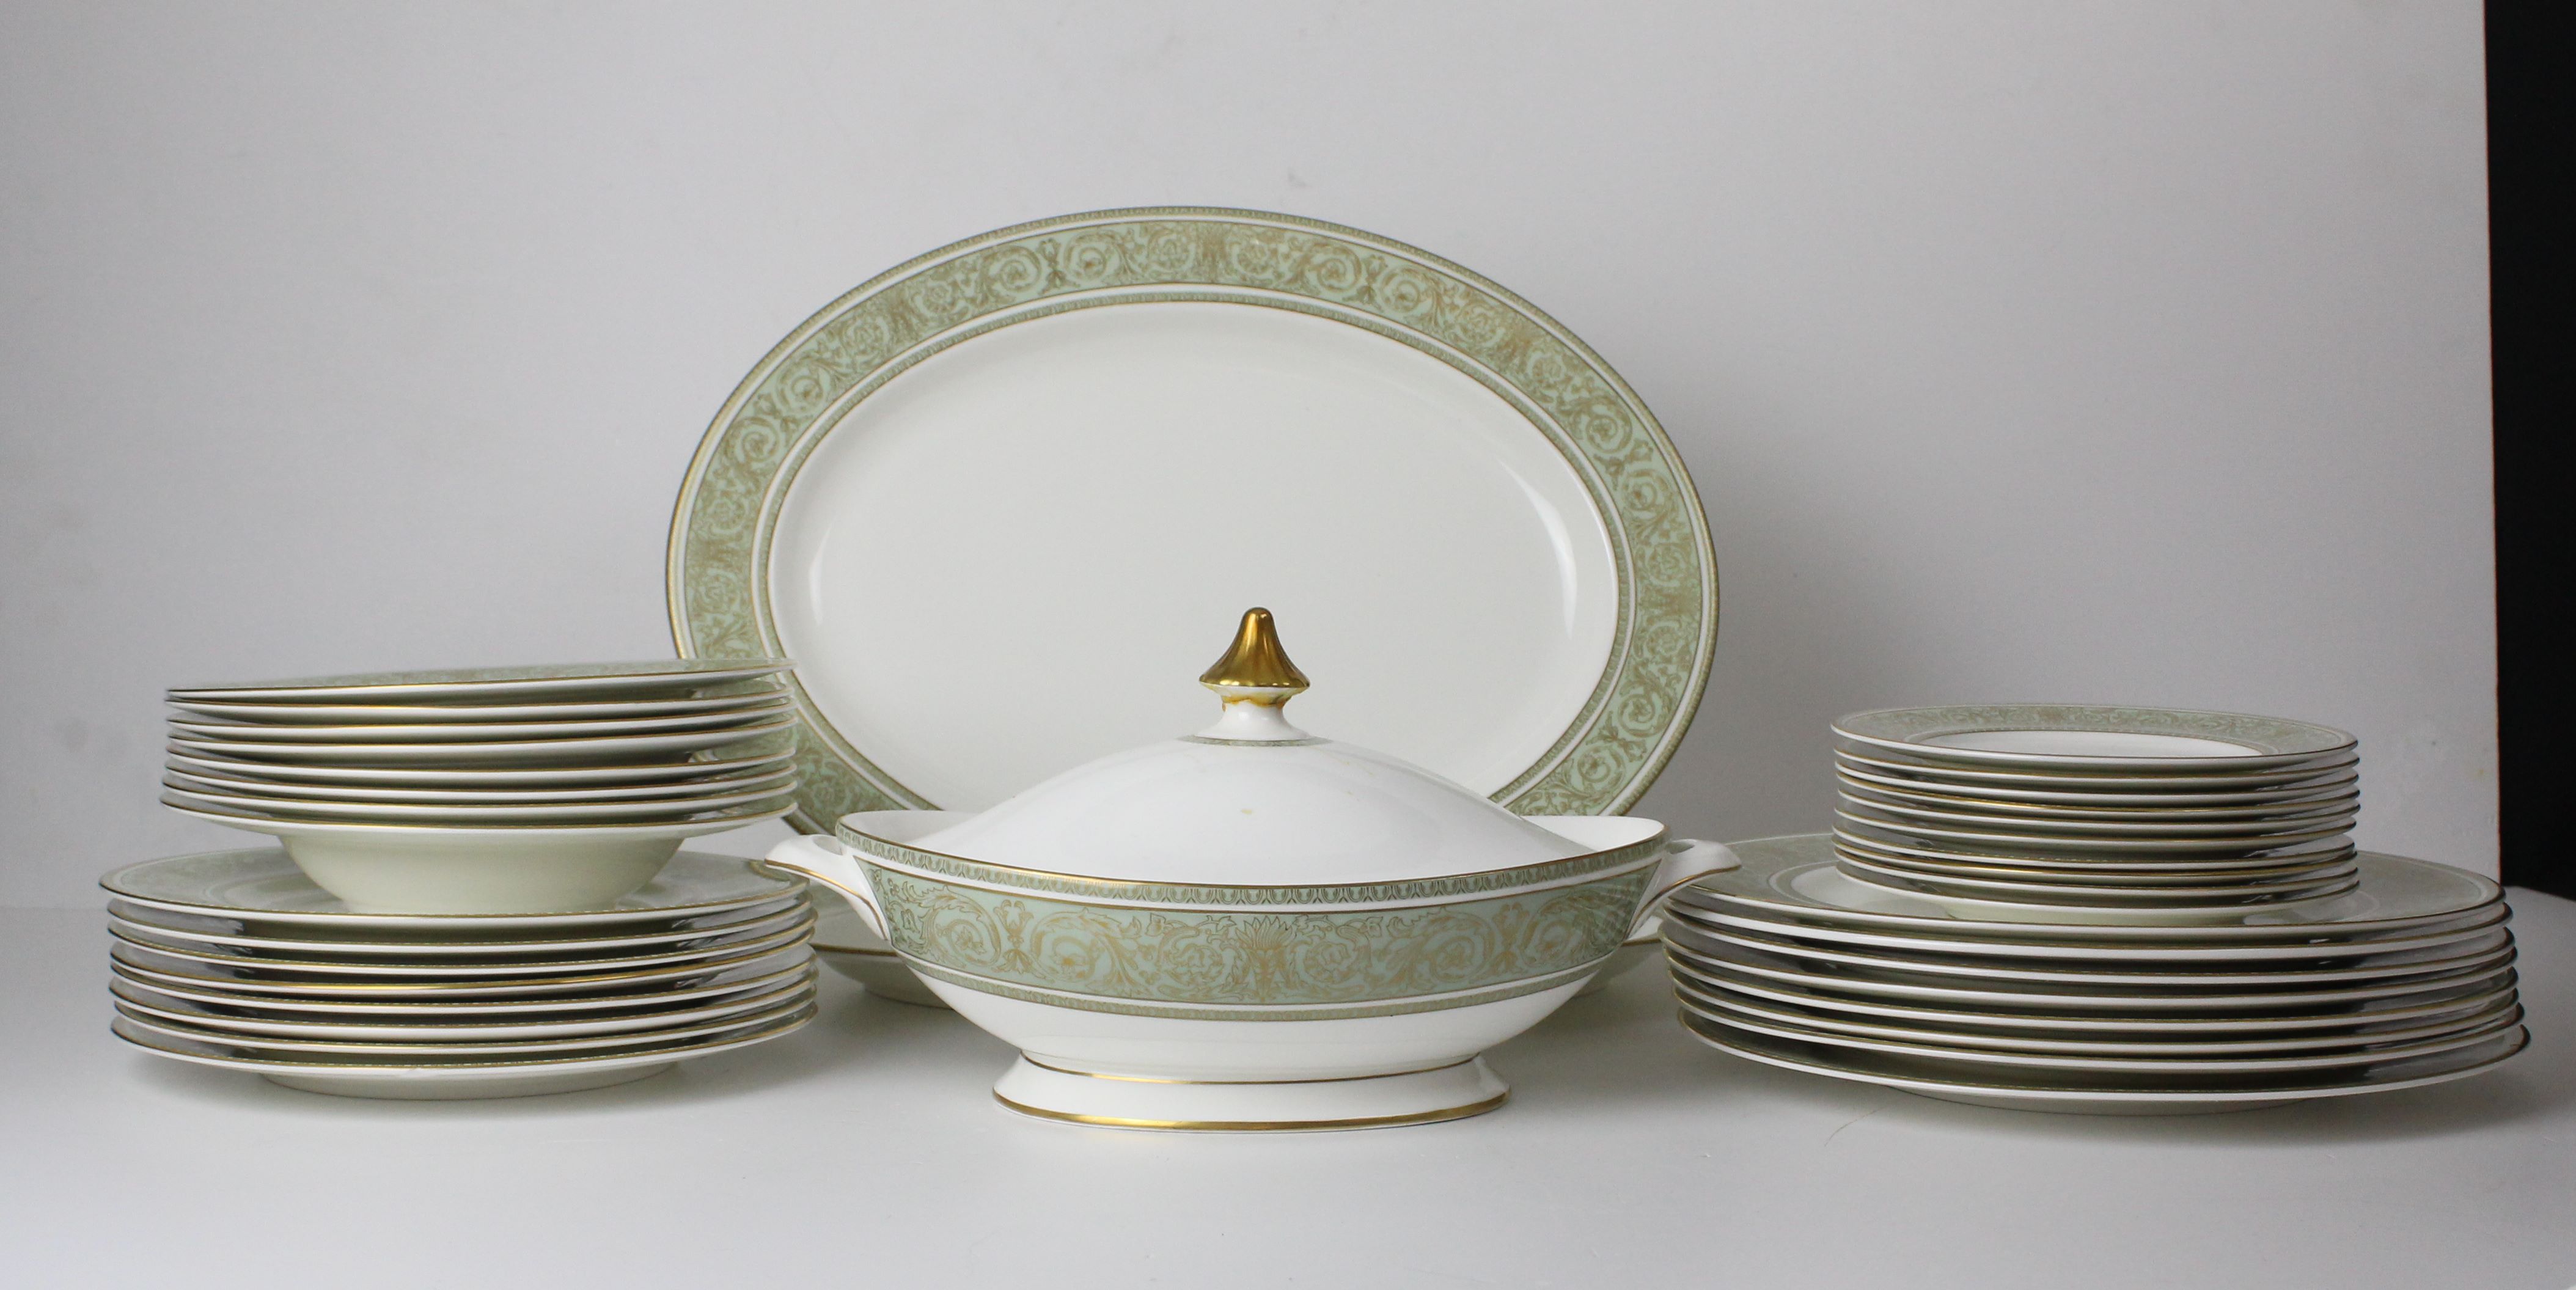 A Royal Doulton English Renaissance pattern dinner service, pale green ground, comprises eigh dinner